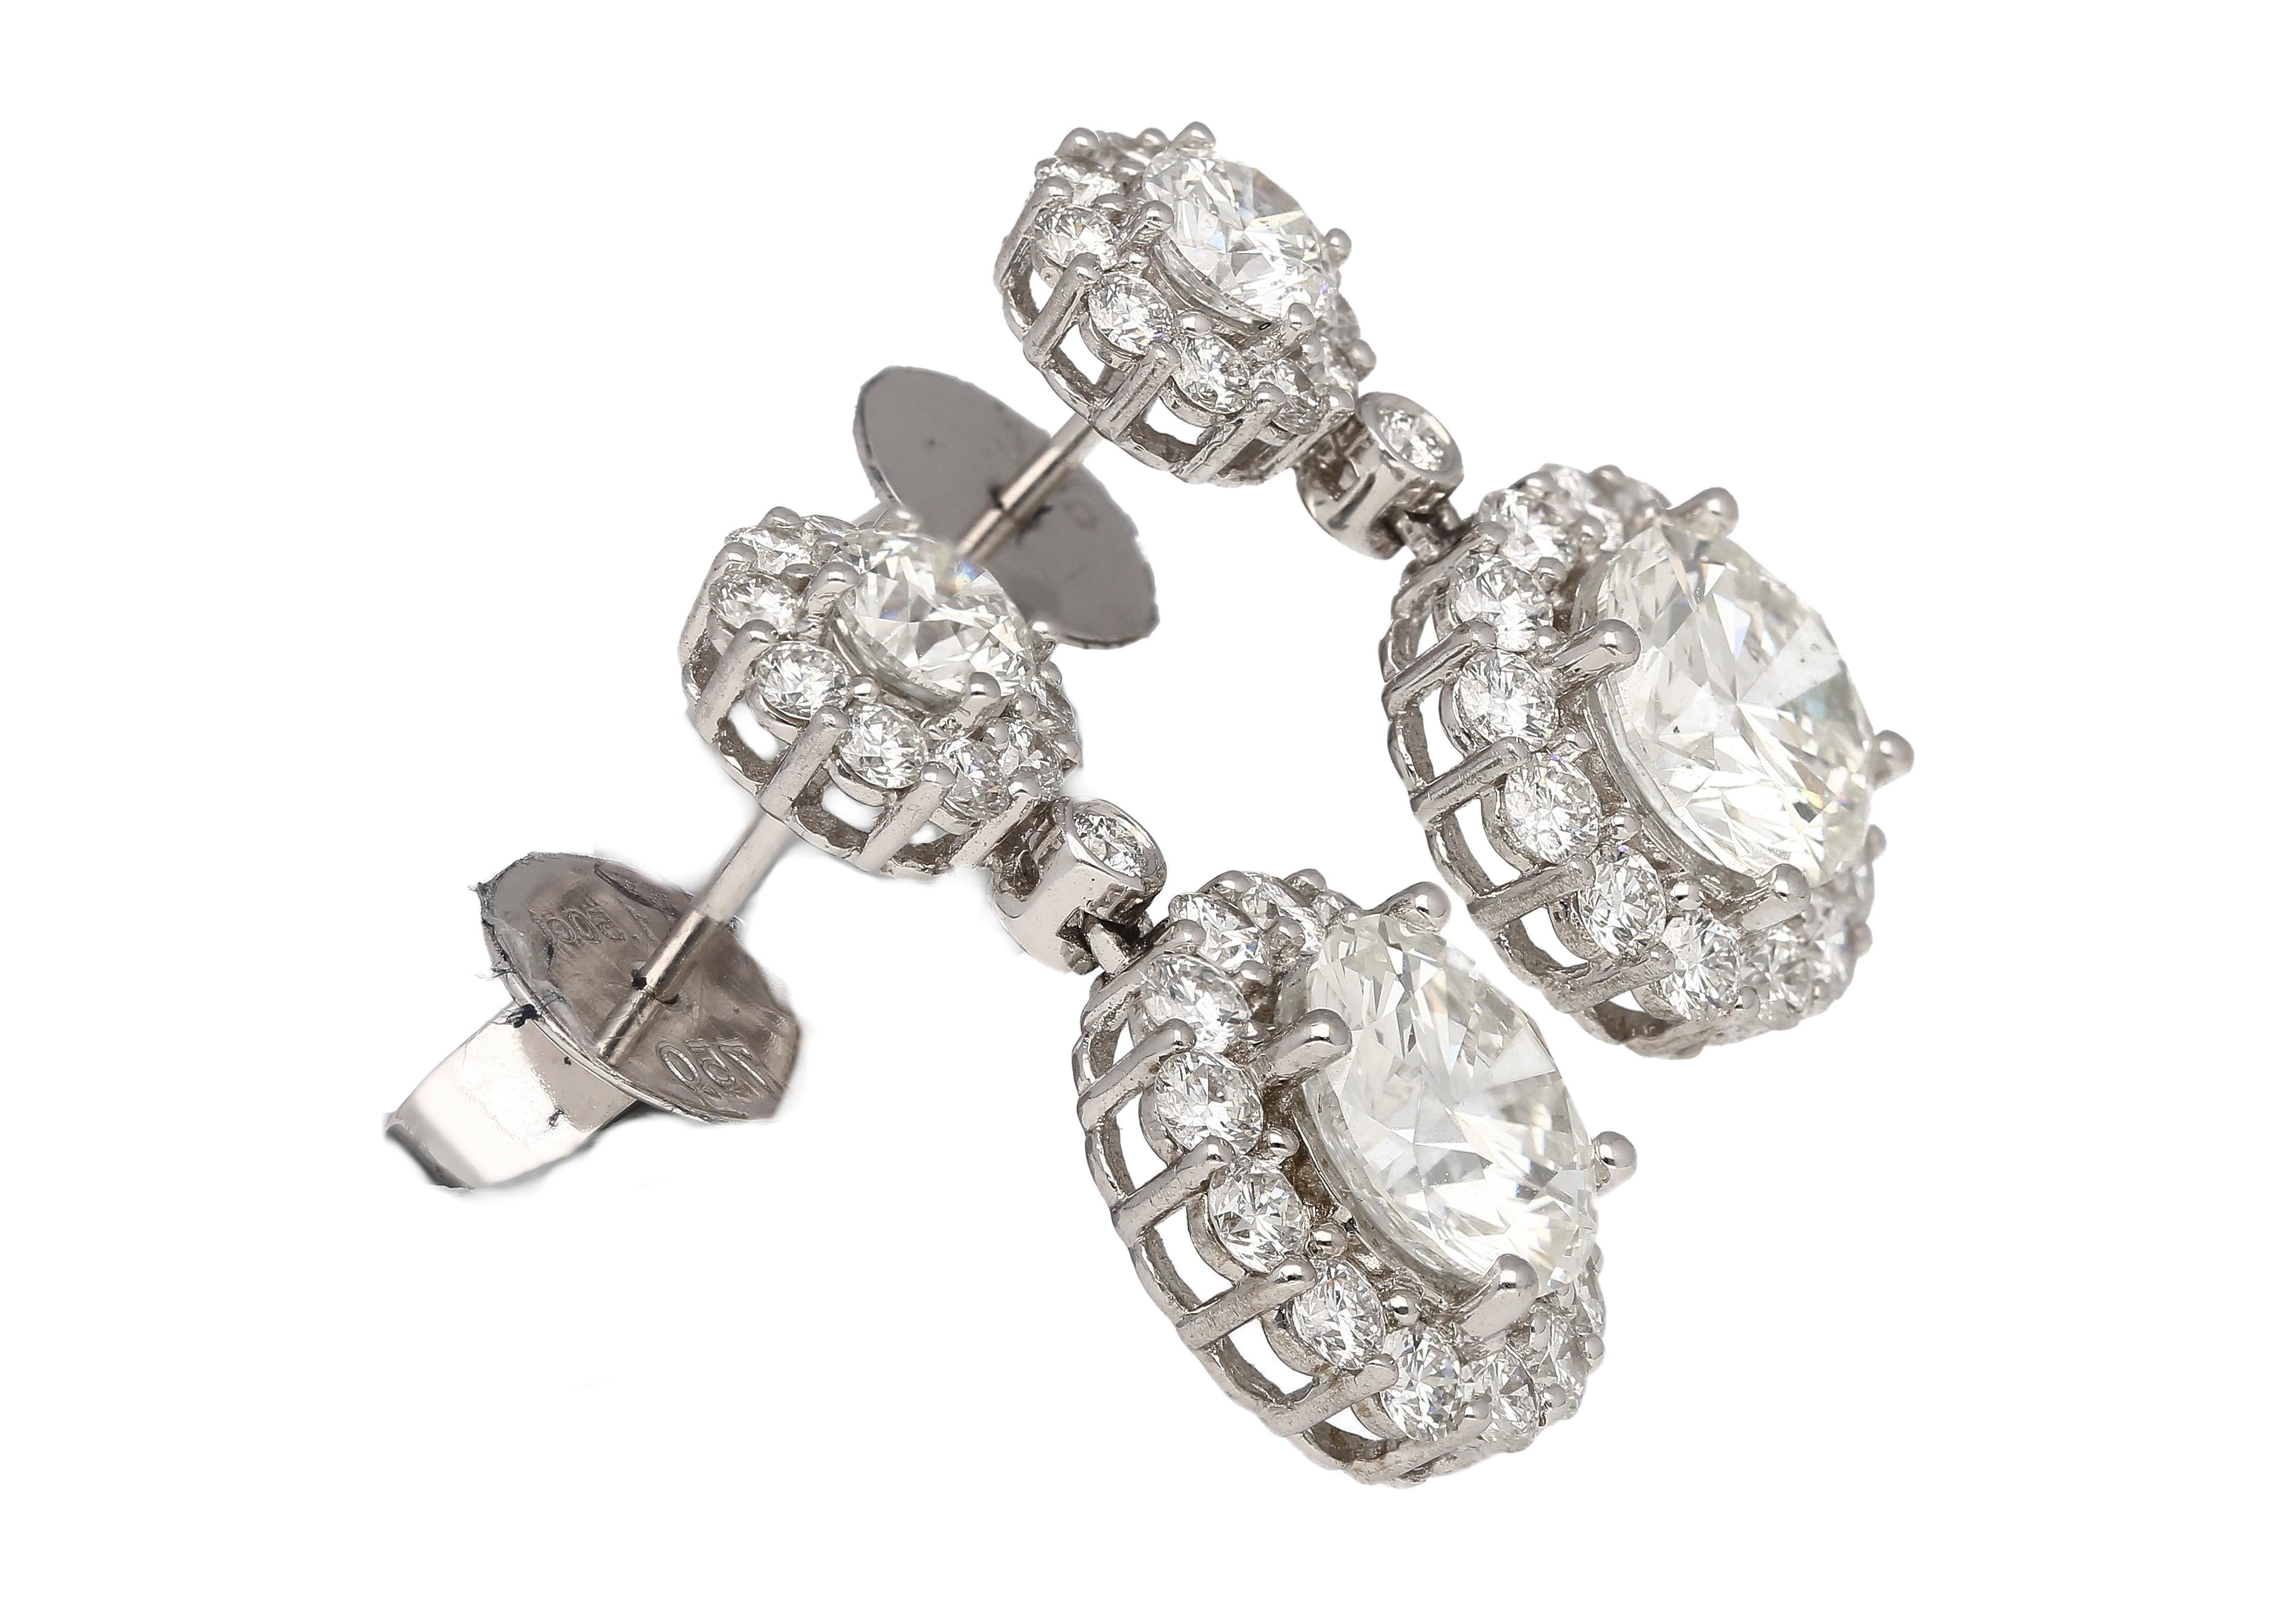 These drop earrings showcase a captivating duo of round diamonds, each boasting 1.51 and 1.50 carats. Graded H for near-colorless beauty and VS2 clarity, they sparkle with exceptional brilliance. Their elegance is further amplified by a sparkling